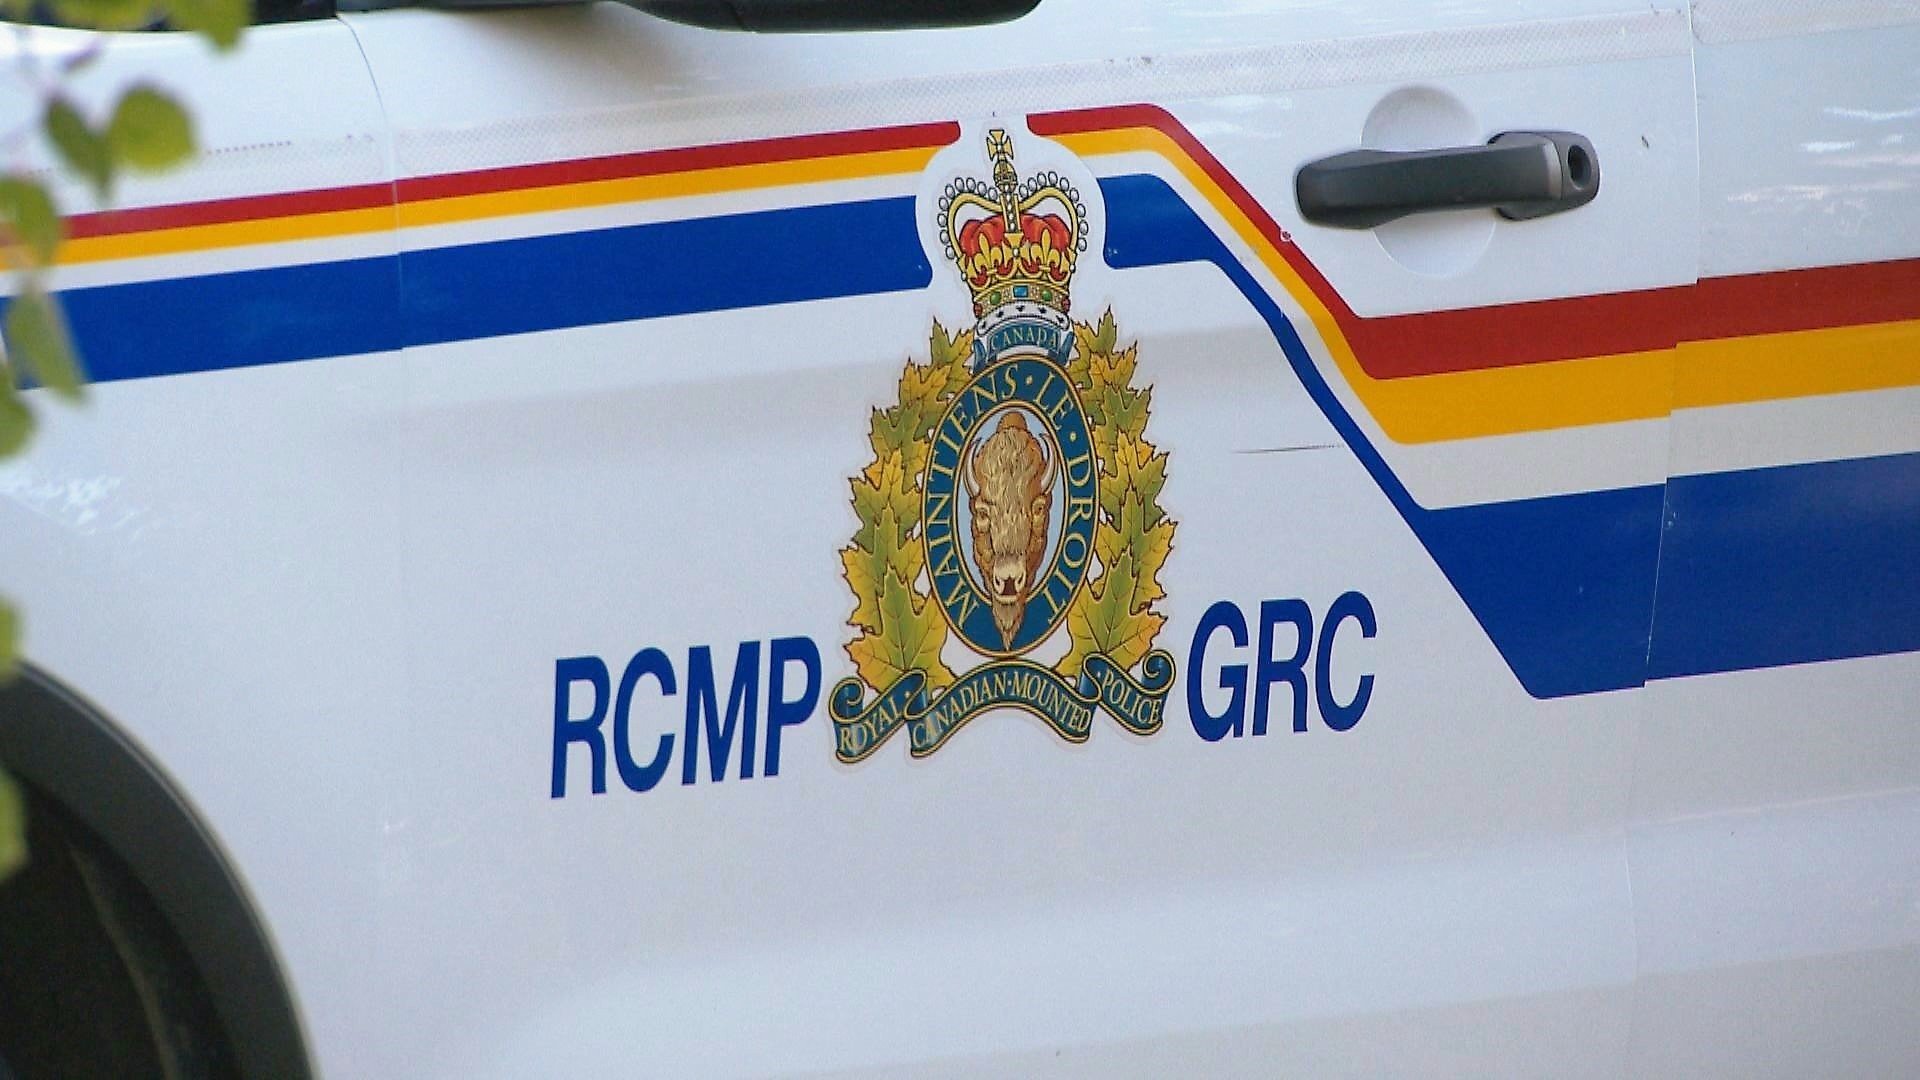 Rural theft and shooting prompts warning from Airdrie, Alta., RCMP